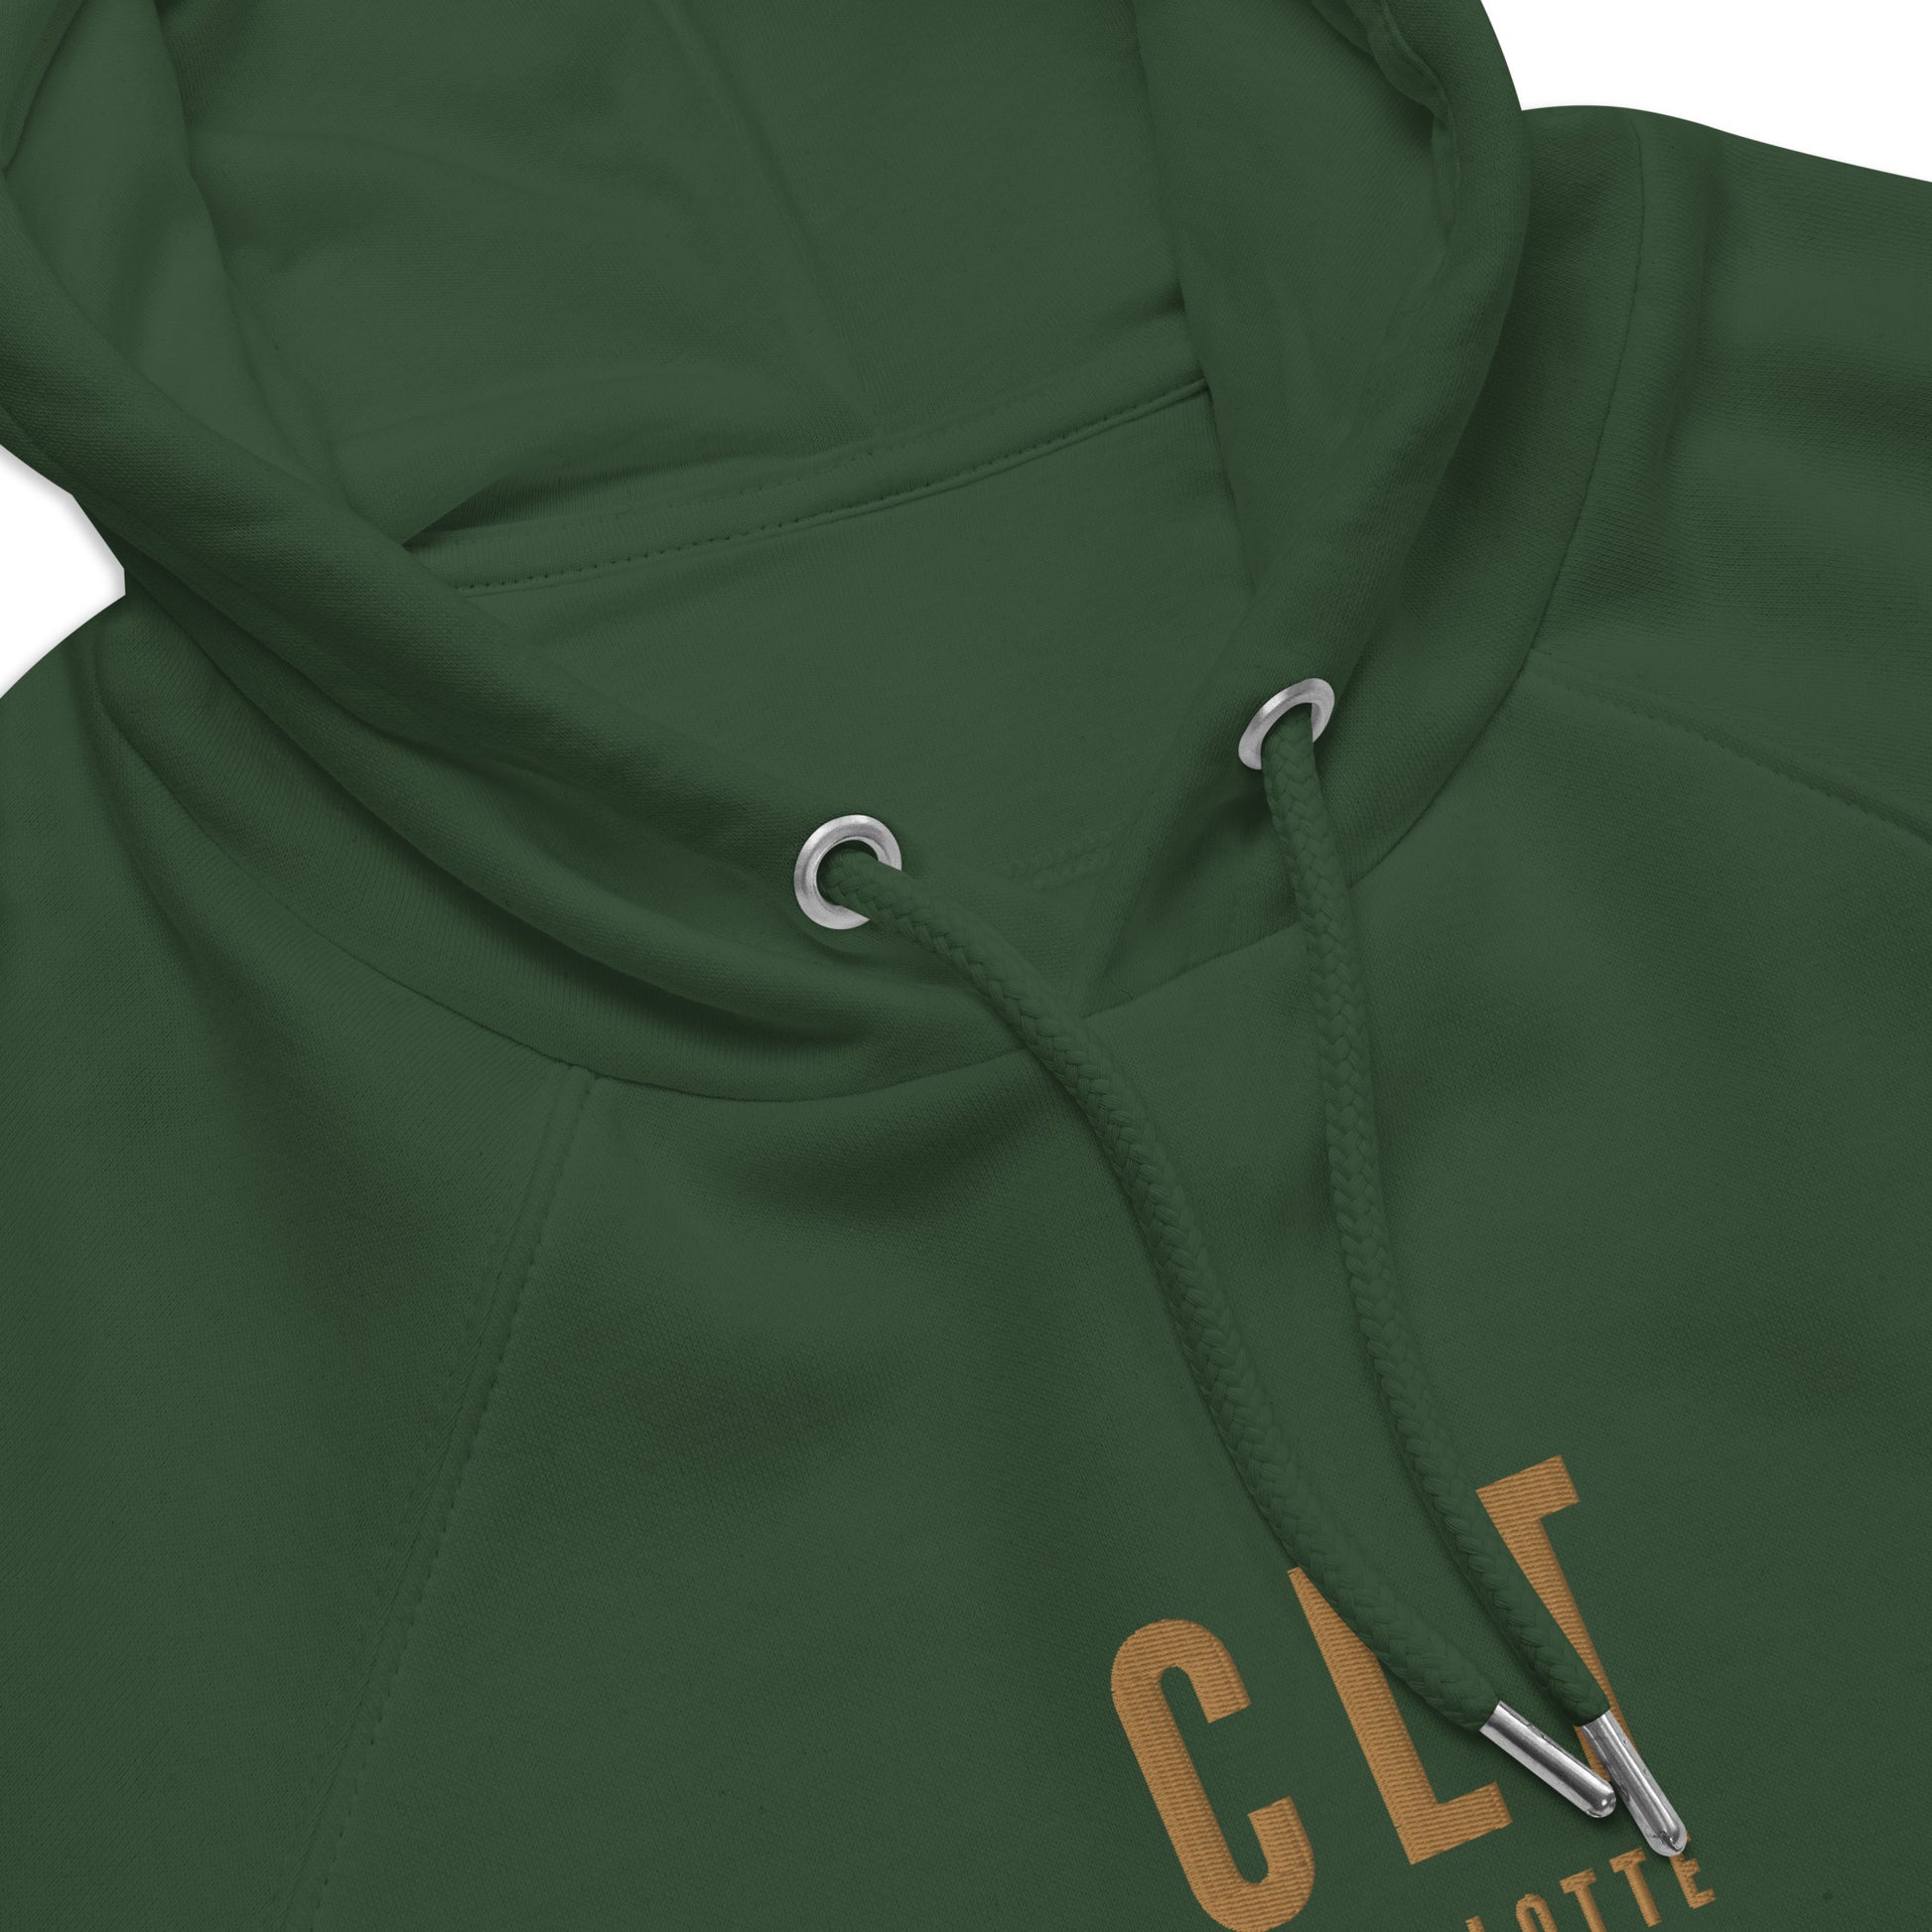 City Organic Hoodie - Old Gold • CLT Charlotte • YHM Designs - Image 07